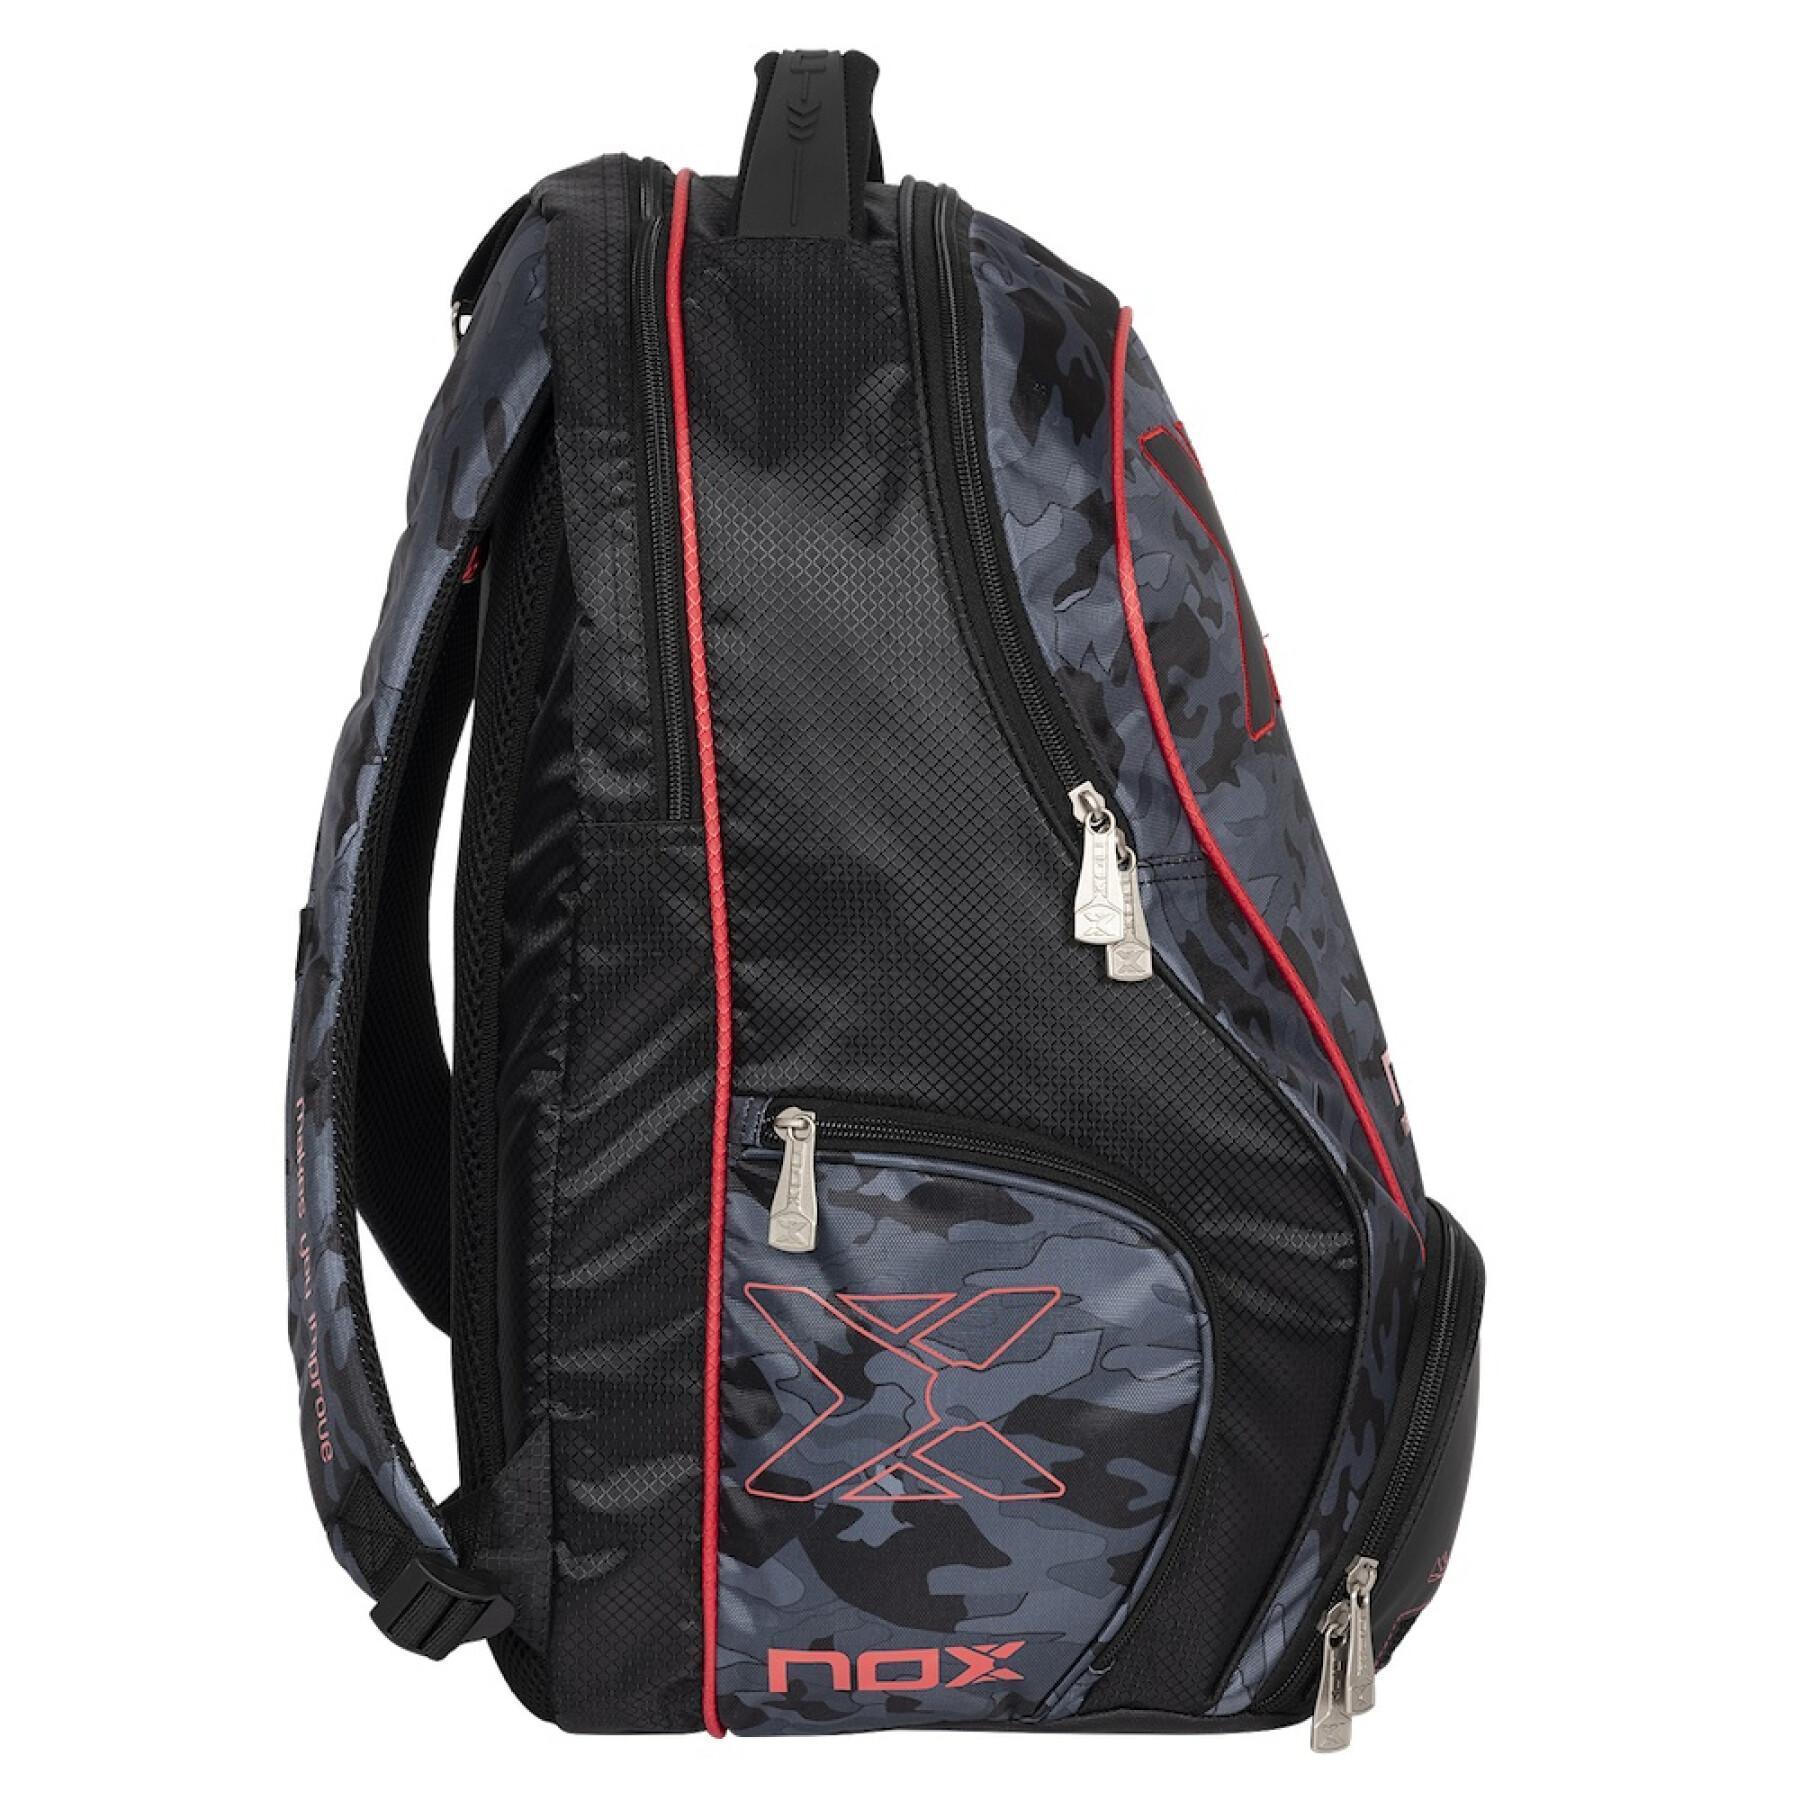 Backpack Nox Camouflage